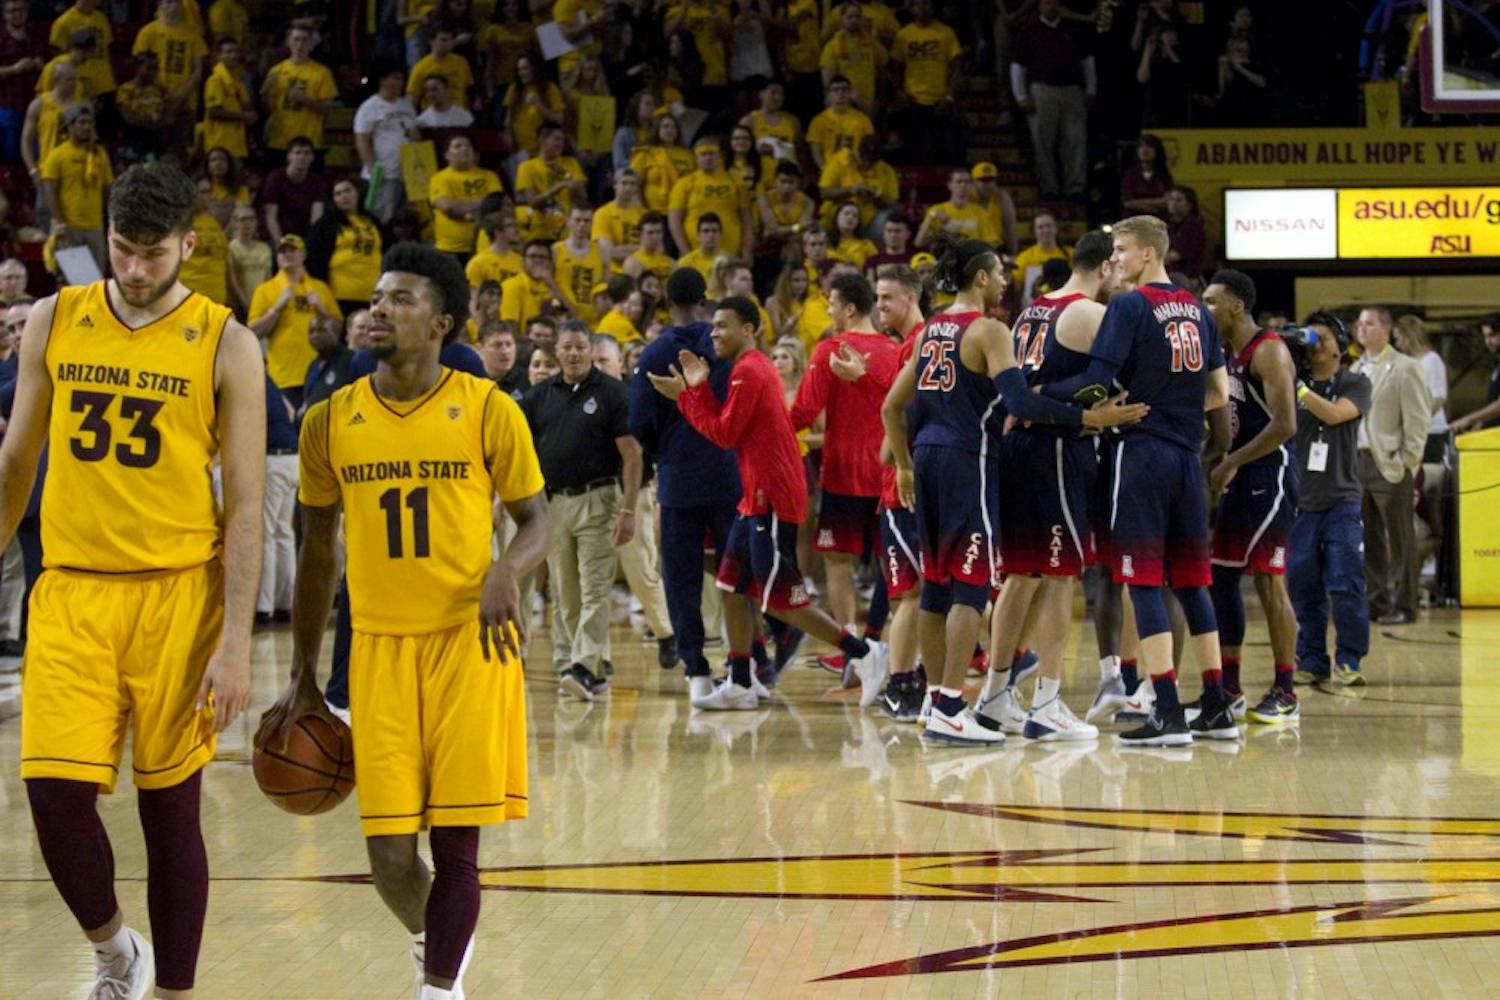 The Arizona Wildcats men's basketball team celebrates after defeating the ASU men's basketball team in Wells Fargo Arena in Tempe, Arizona on Saturday, March 4, 2017. ASU lost 73-60. 